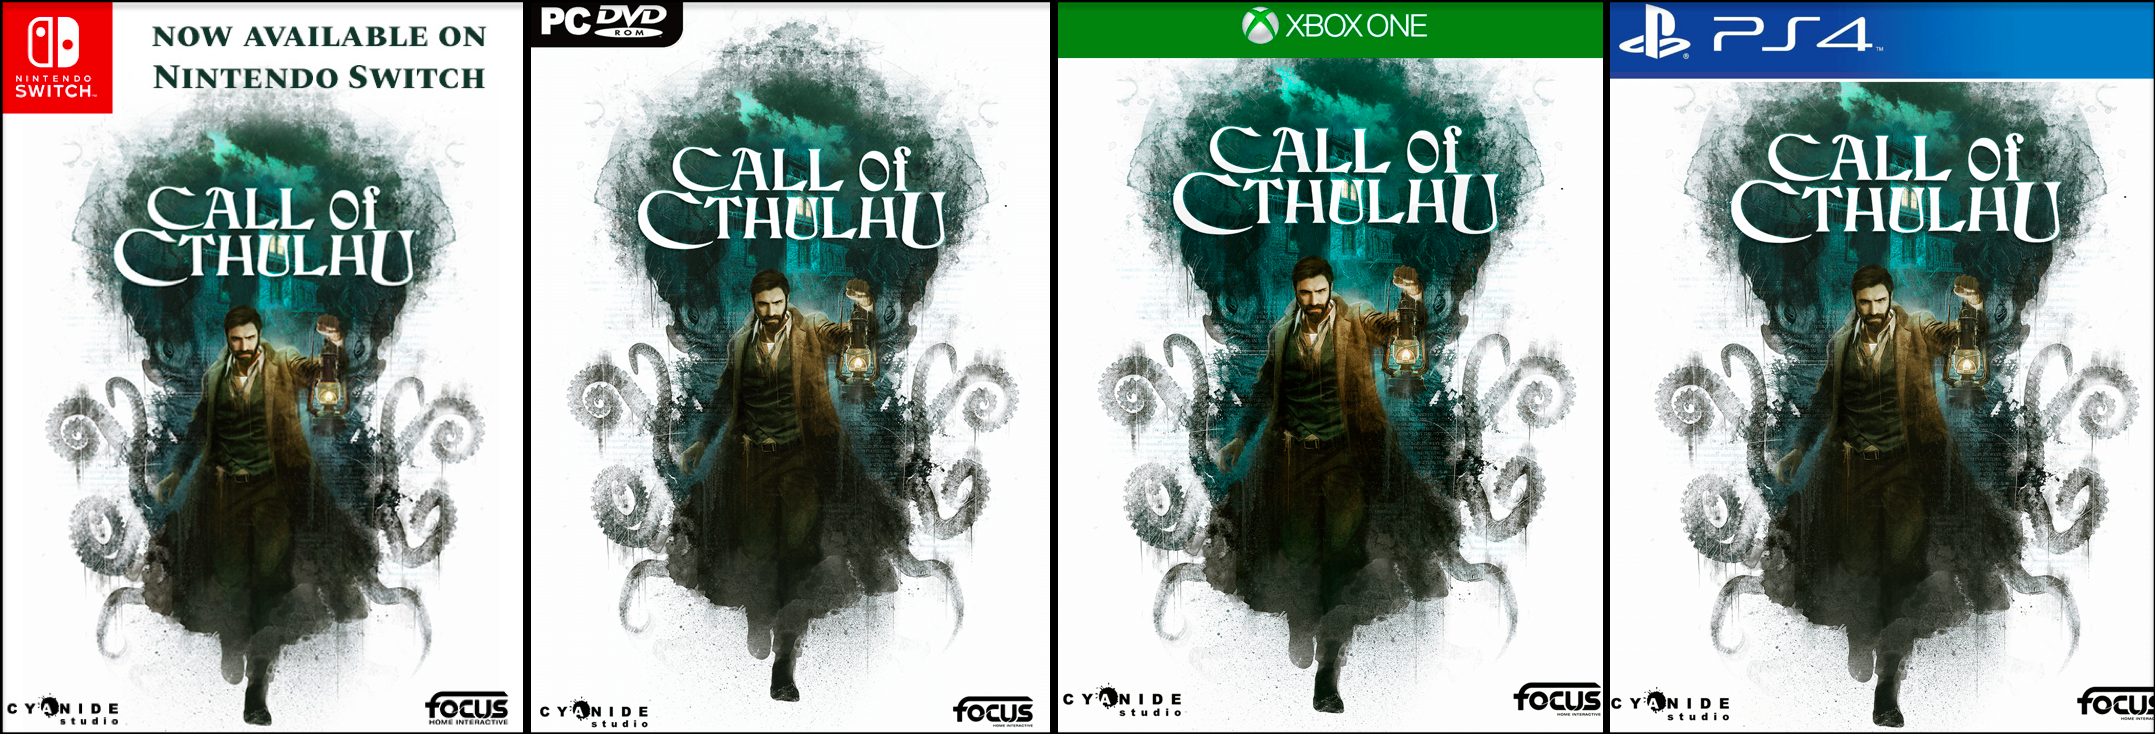 Call of Cthulhu the Official Video Game on the various game platforms